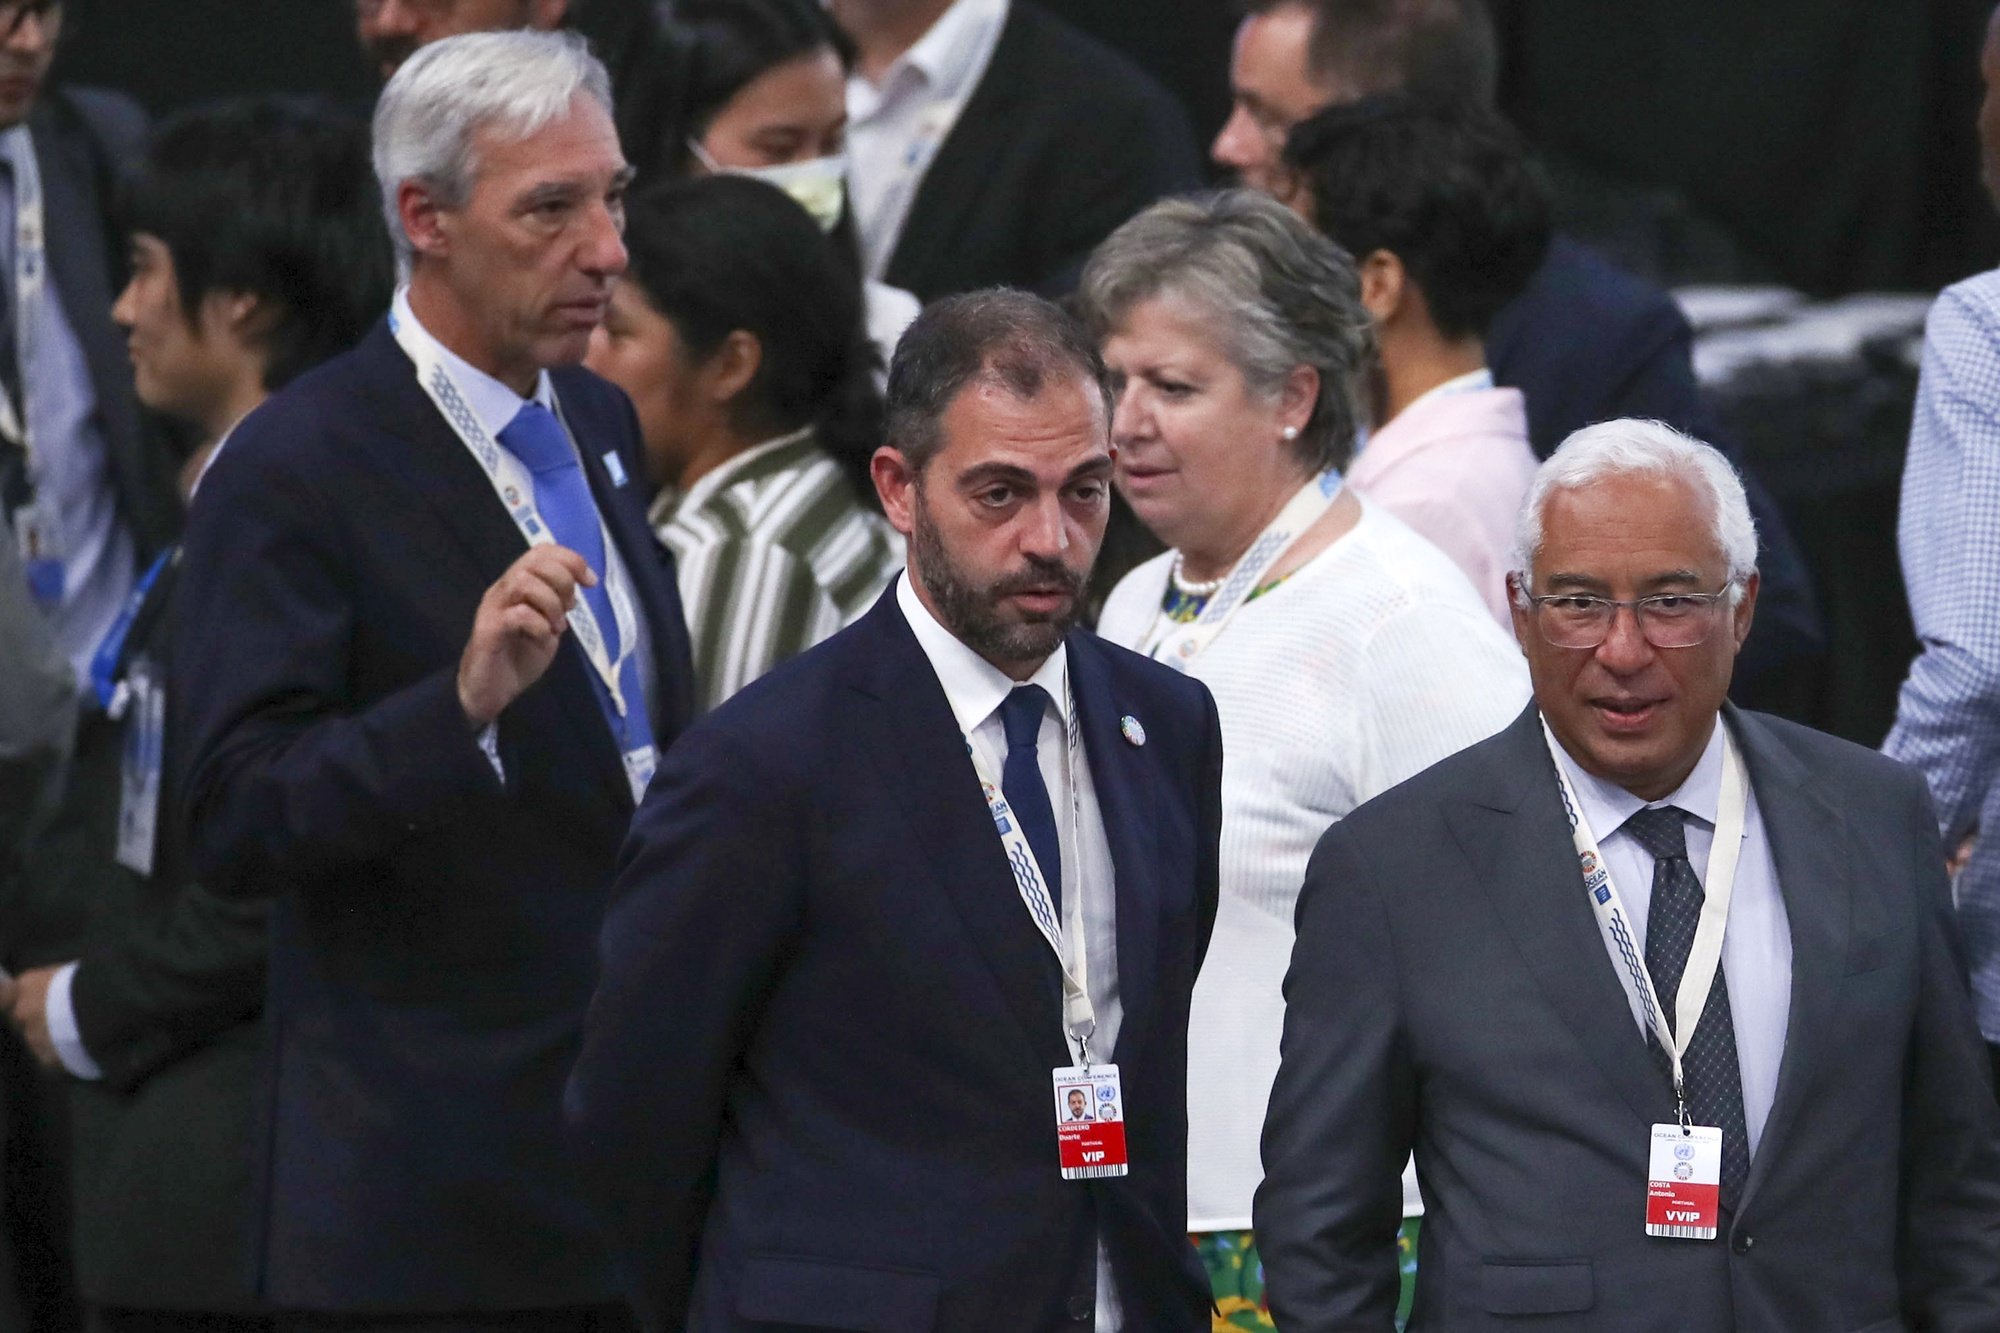 Portuguese Prime Minister Antonio Costa (R), the Minister of Foreign Affairs Joao Gomes Cravinho (L), and the Minister of Environment and Climate Action Duarte Caldeira (C), during the last day of UN Ocean Conference in Lisbon, Portugal, 01 July 2022. ANTONIO COTRIM/LUSA